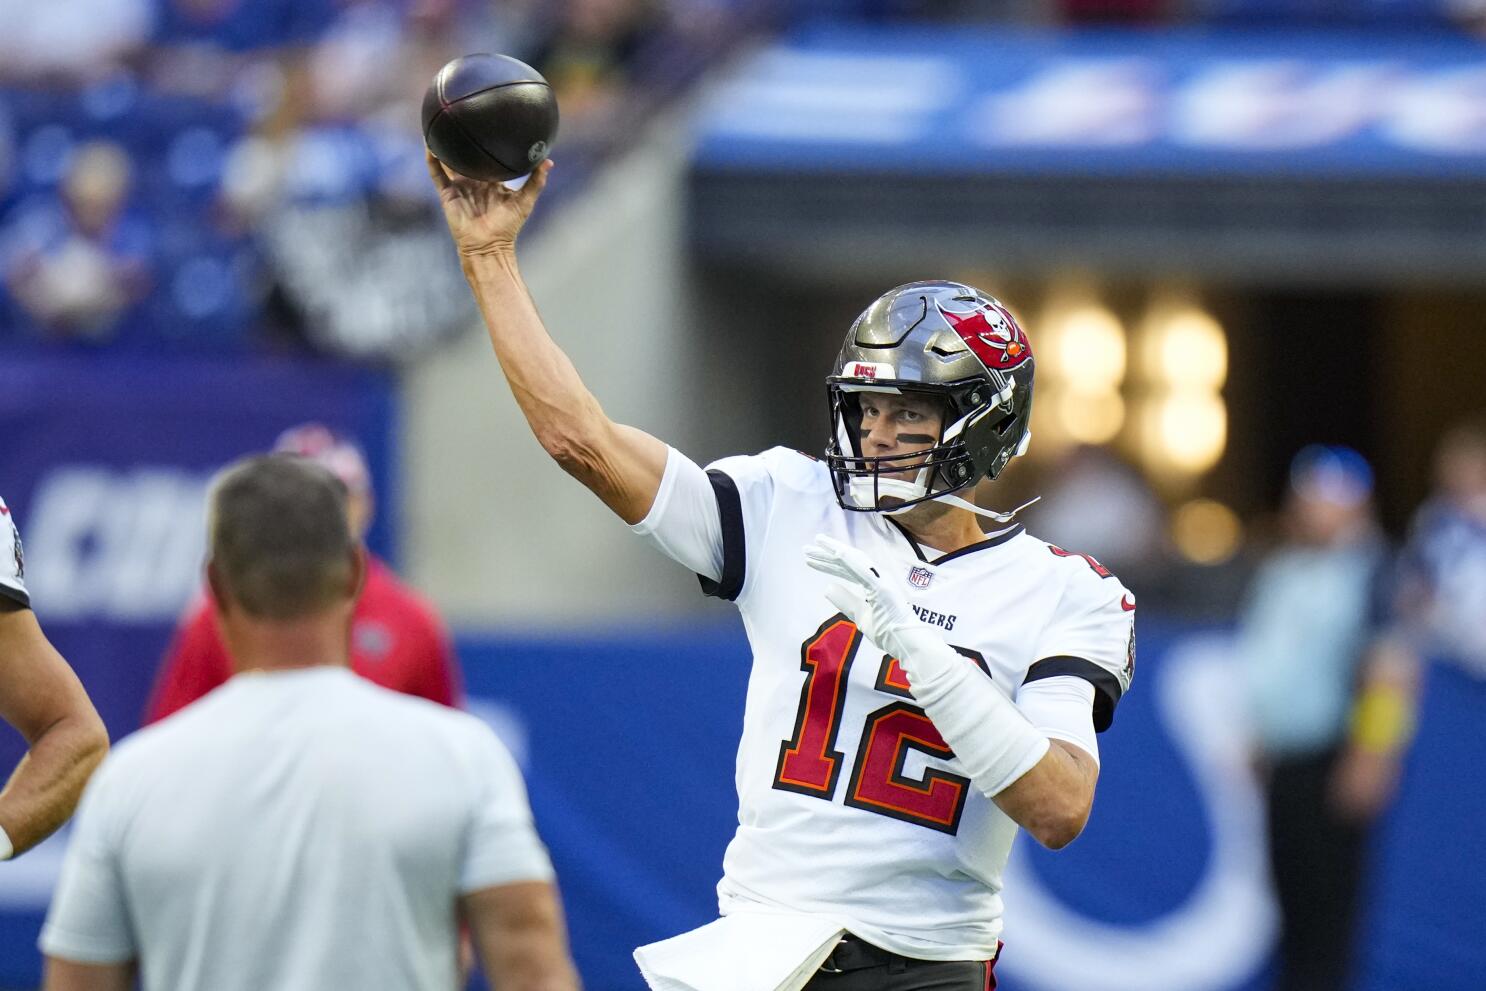 NFC South rivals add QBs as Bucs' Brady keeps rolling at 45 - The